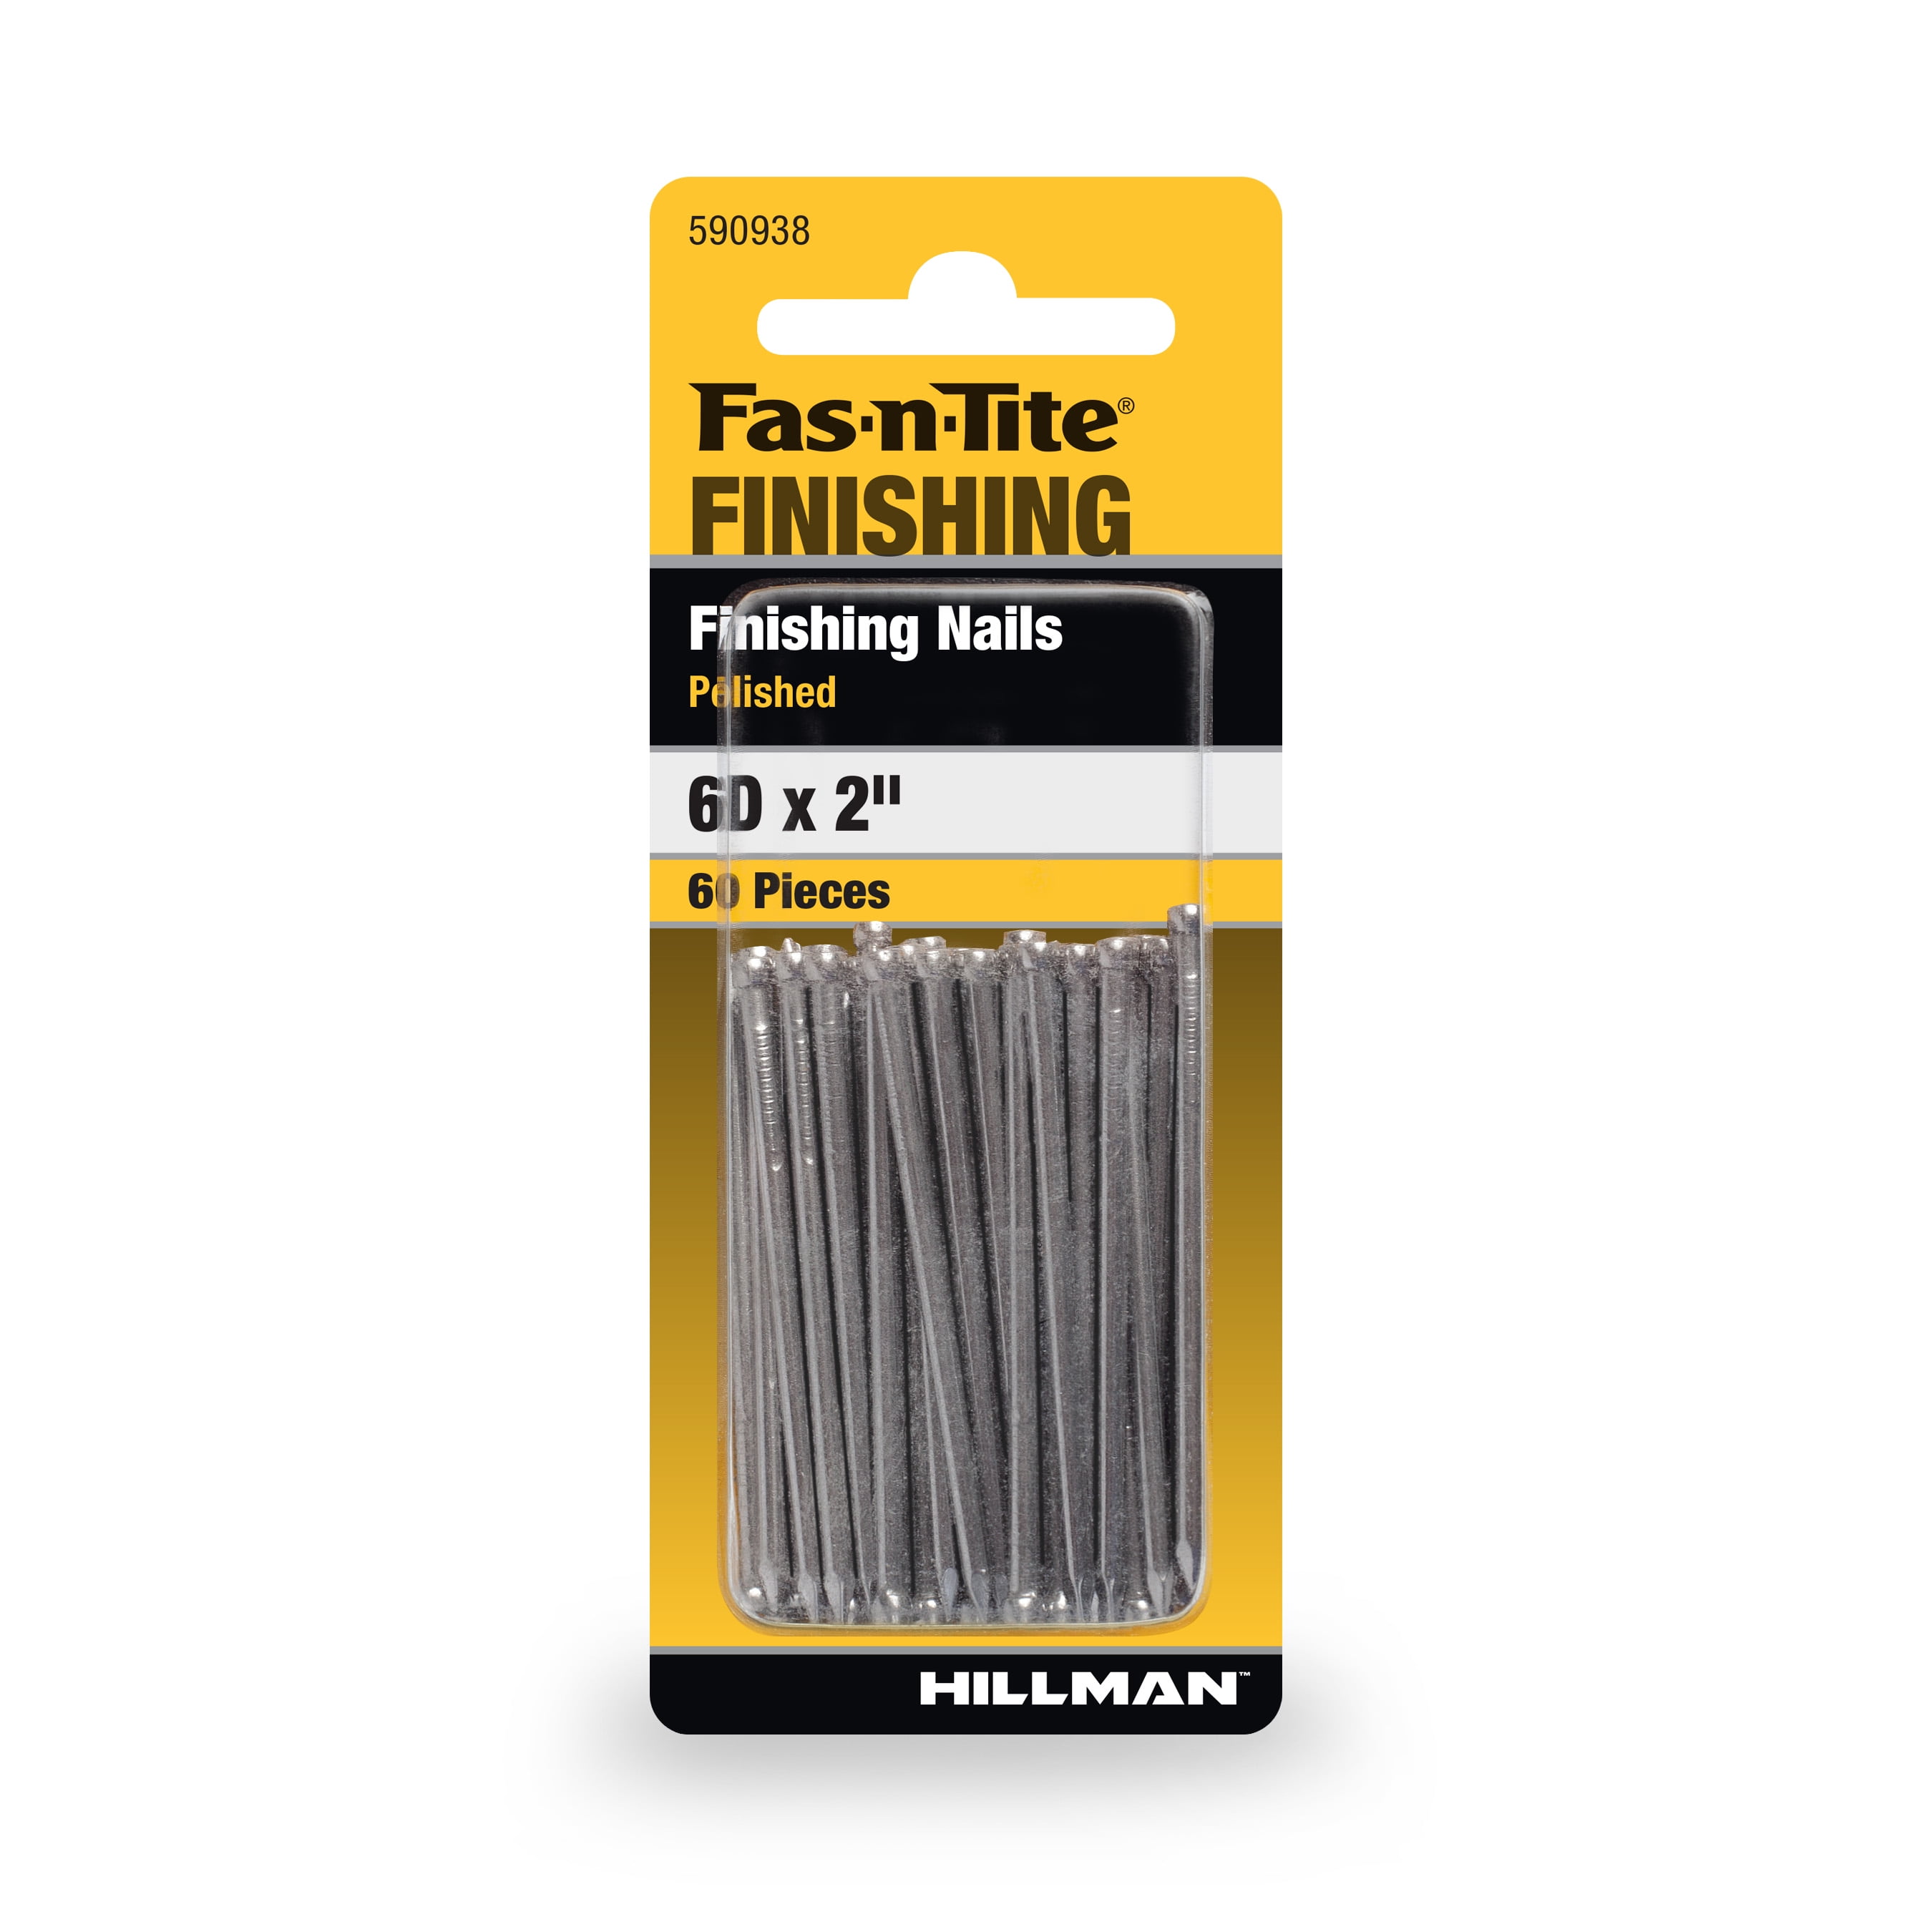 Fas-n-Tite Finish Nails, Polished Finish, Steel, 6D x 2", 60 Pieces